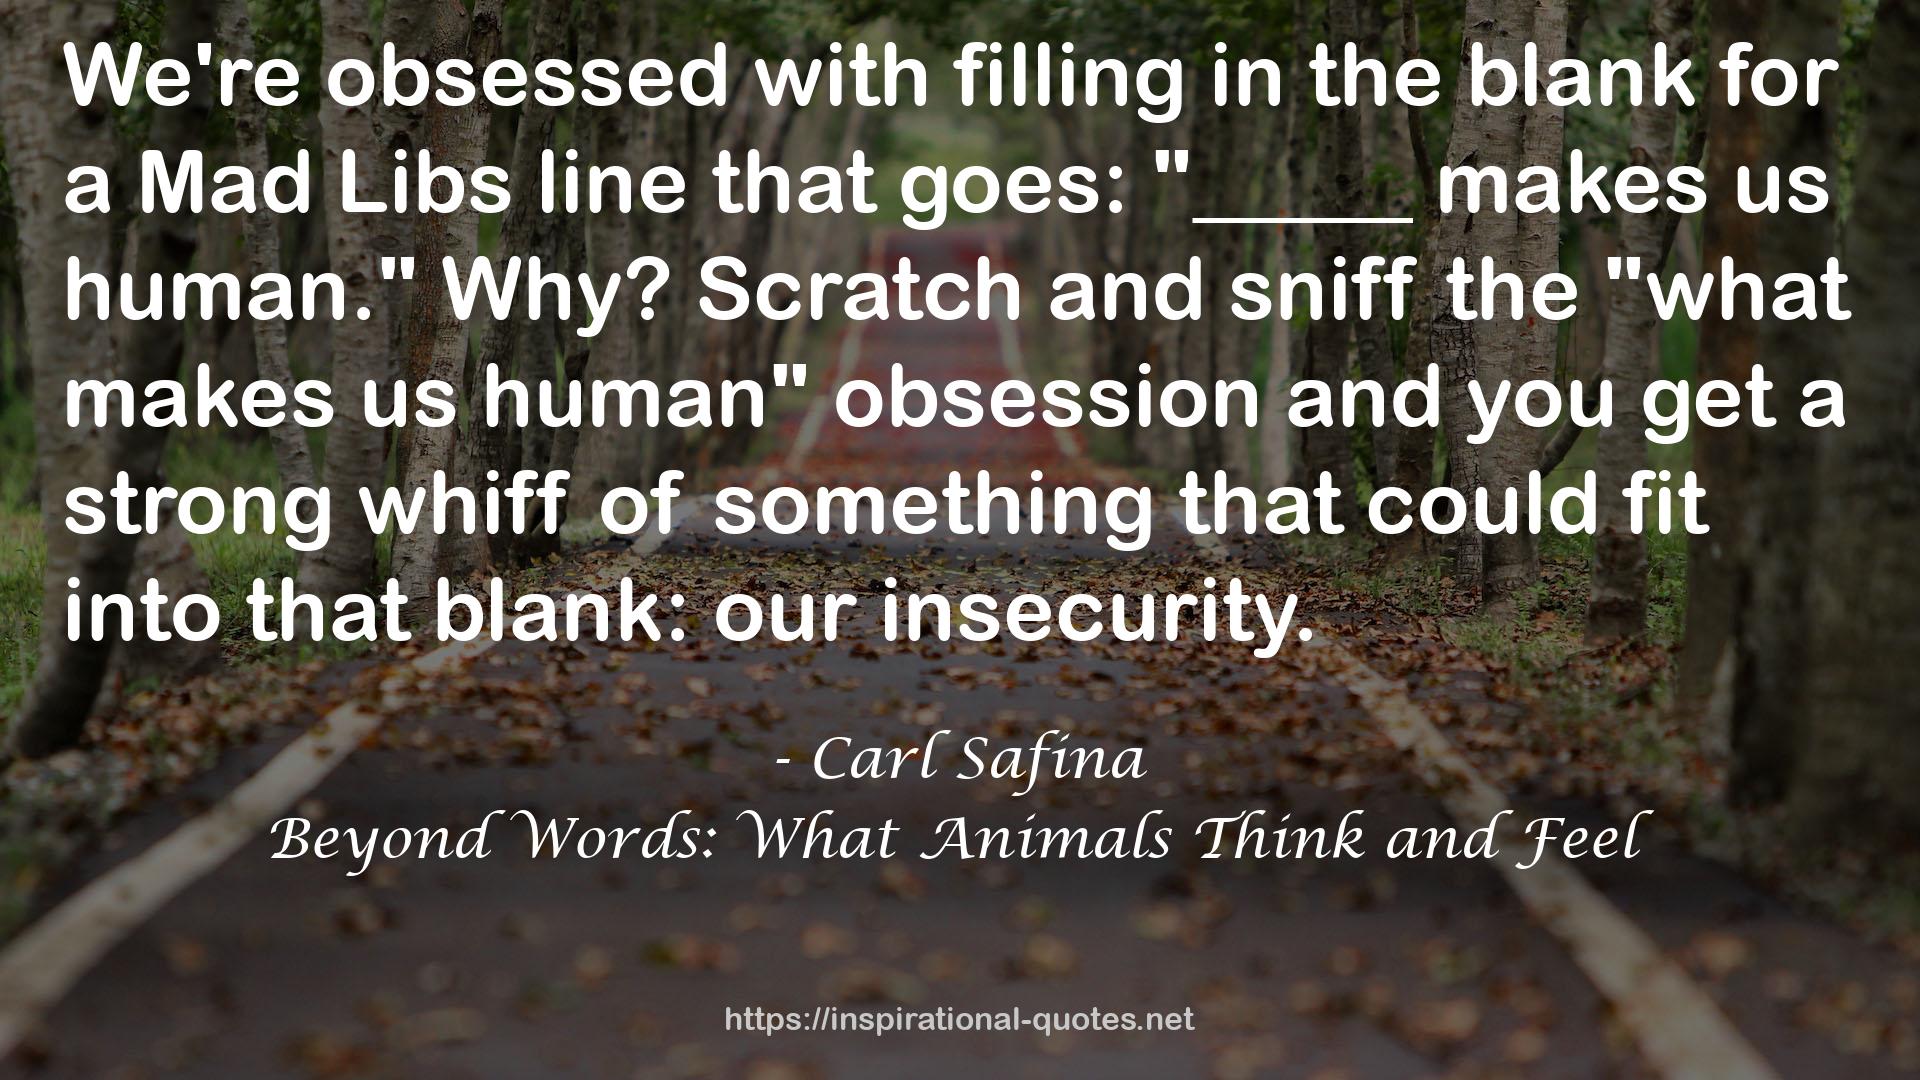 Beyond Words: What Animals Think and Feel QUOTES